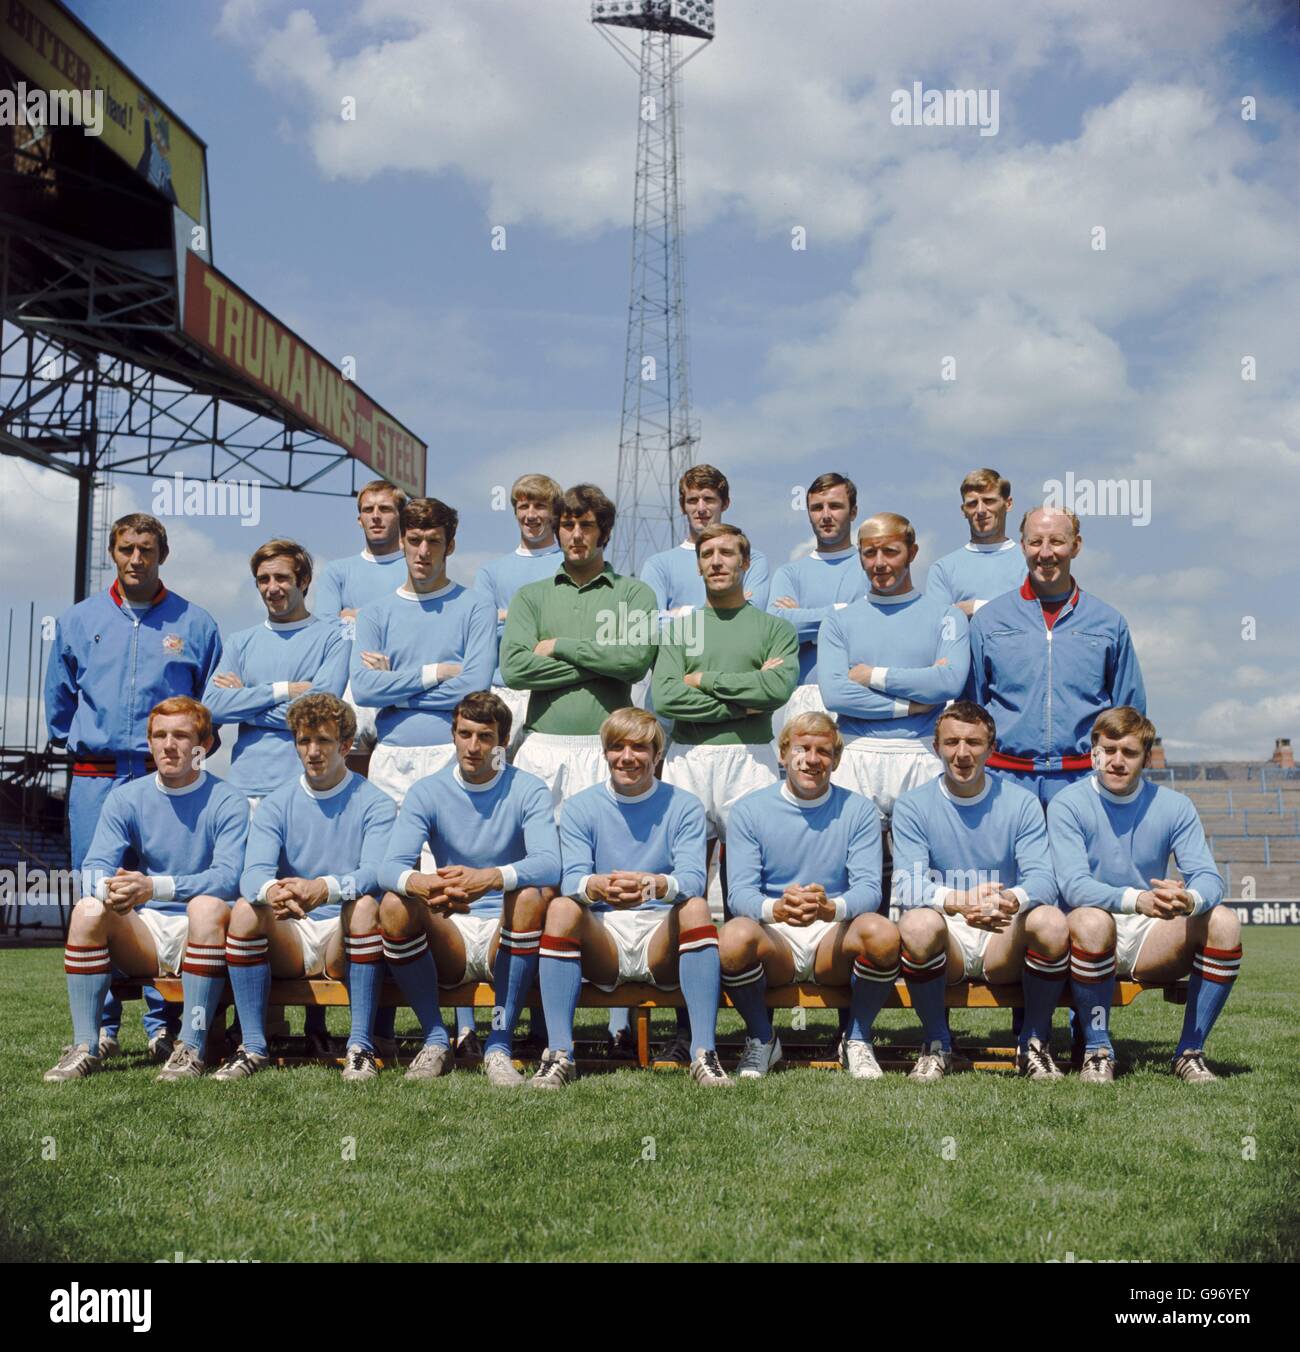 Back row, left to right: Alan Oakes, Colin Bell, Mike Doyle, Glyn Pardoe, Tony Book. Middle row: Malcolm Allison, Arthur Mann, Tommy Booth, Joe Corrigan, Harry Dowd, George Heslop,Dave Ewing. Front row: Ian Bowyer Bobby Owen, Neil Young, Tony Coleman, Francis Lee, Mike Summerbee,Dave Conner. Stock Photo